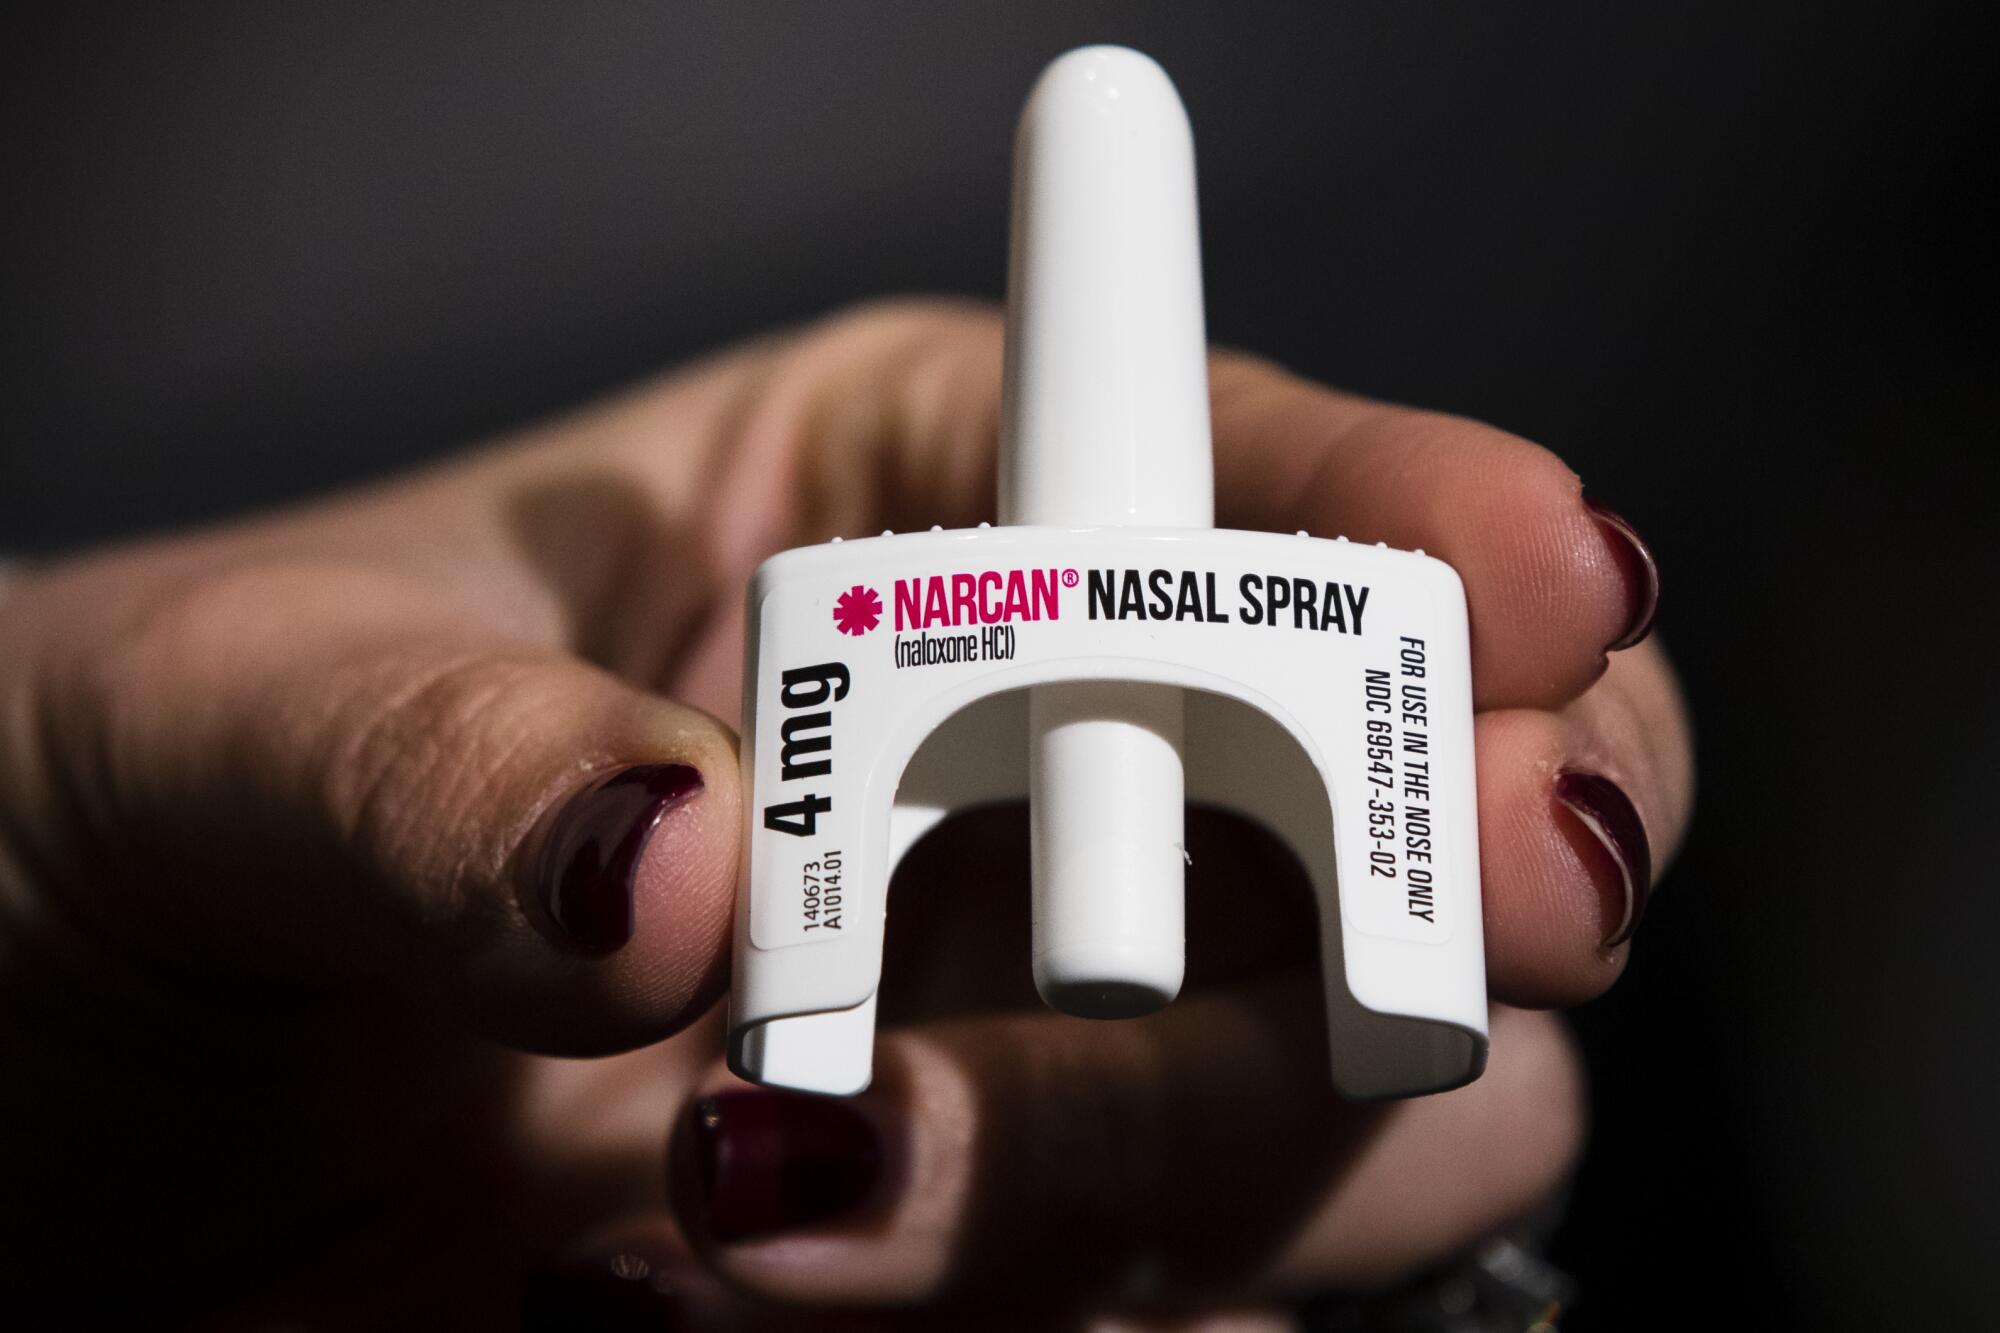 A close view of a hand with dark-red painted fingernails holding Narcan nasal spray